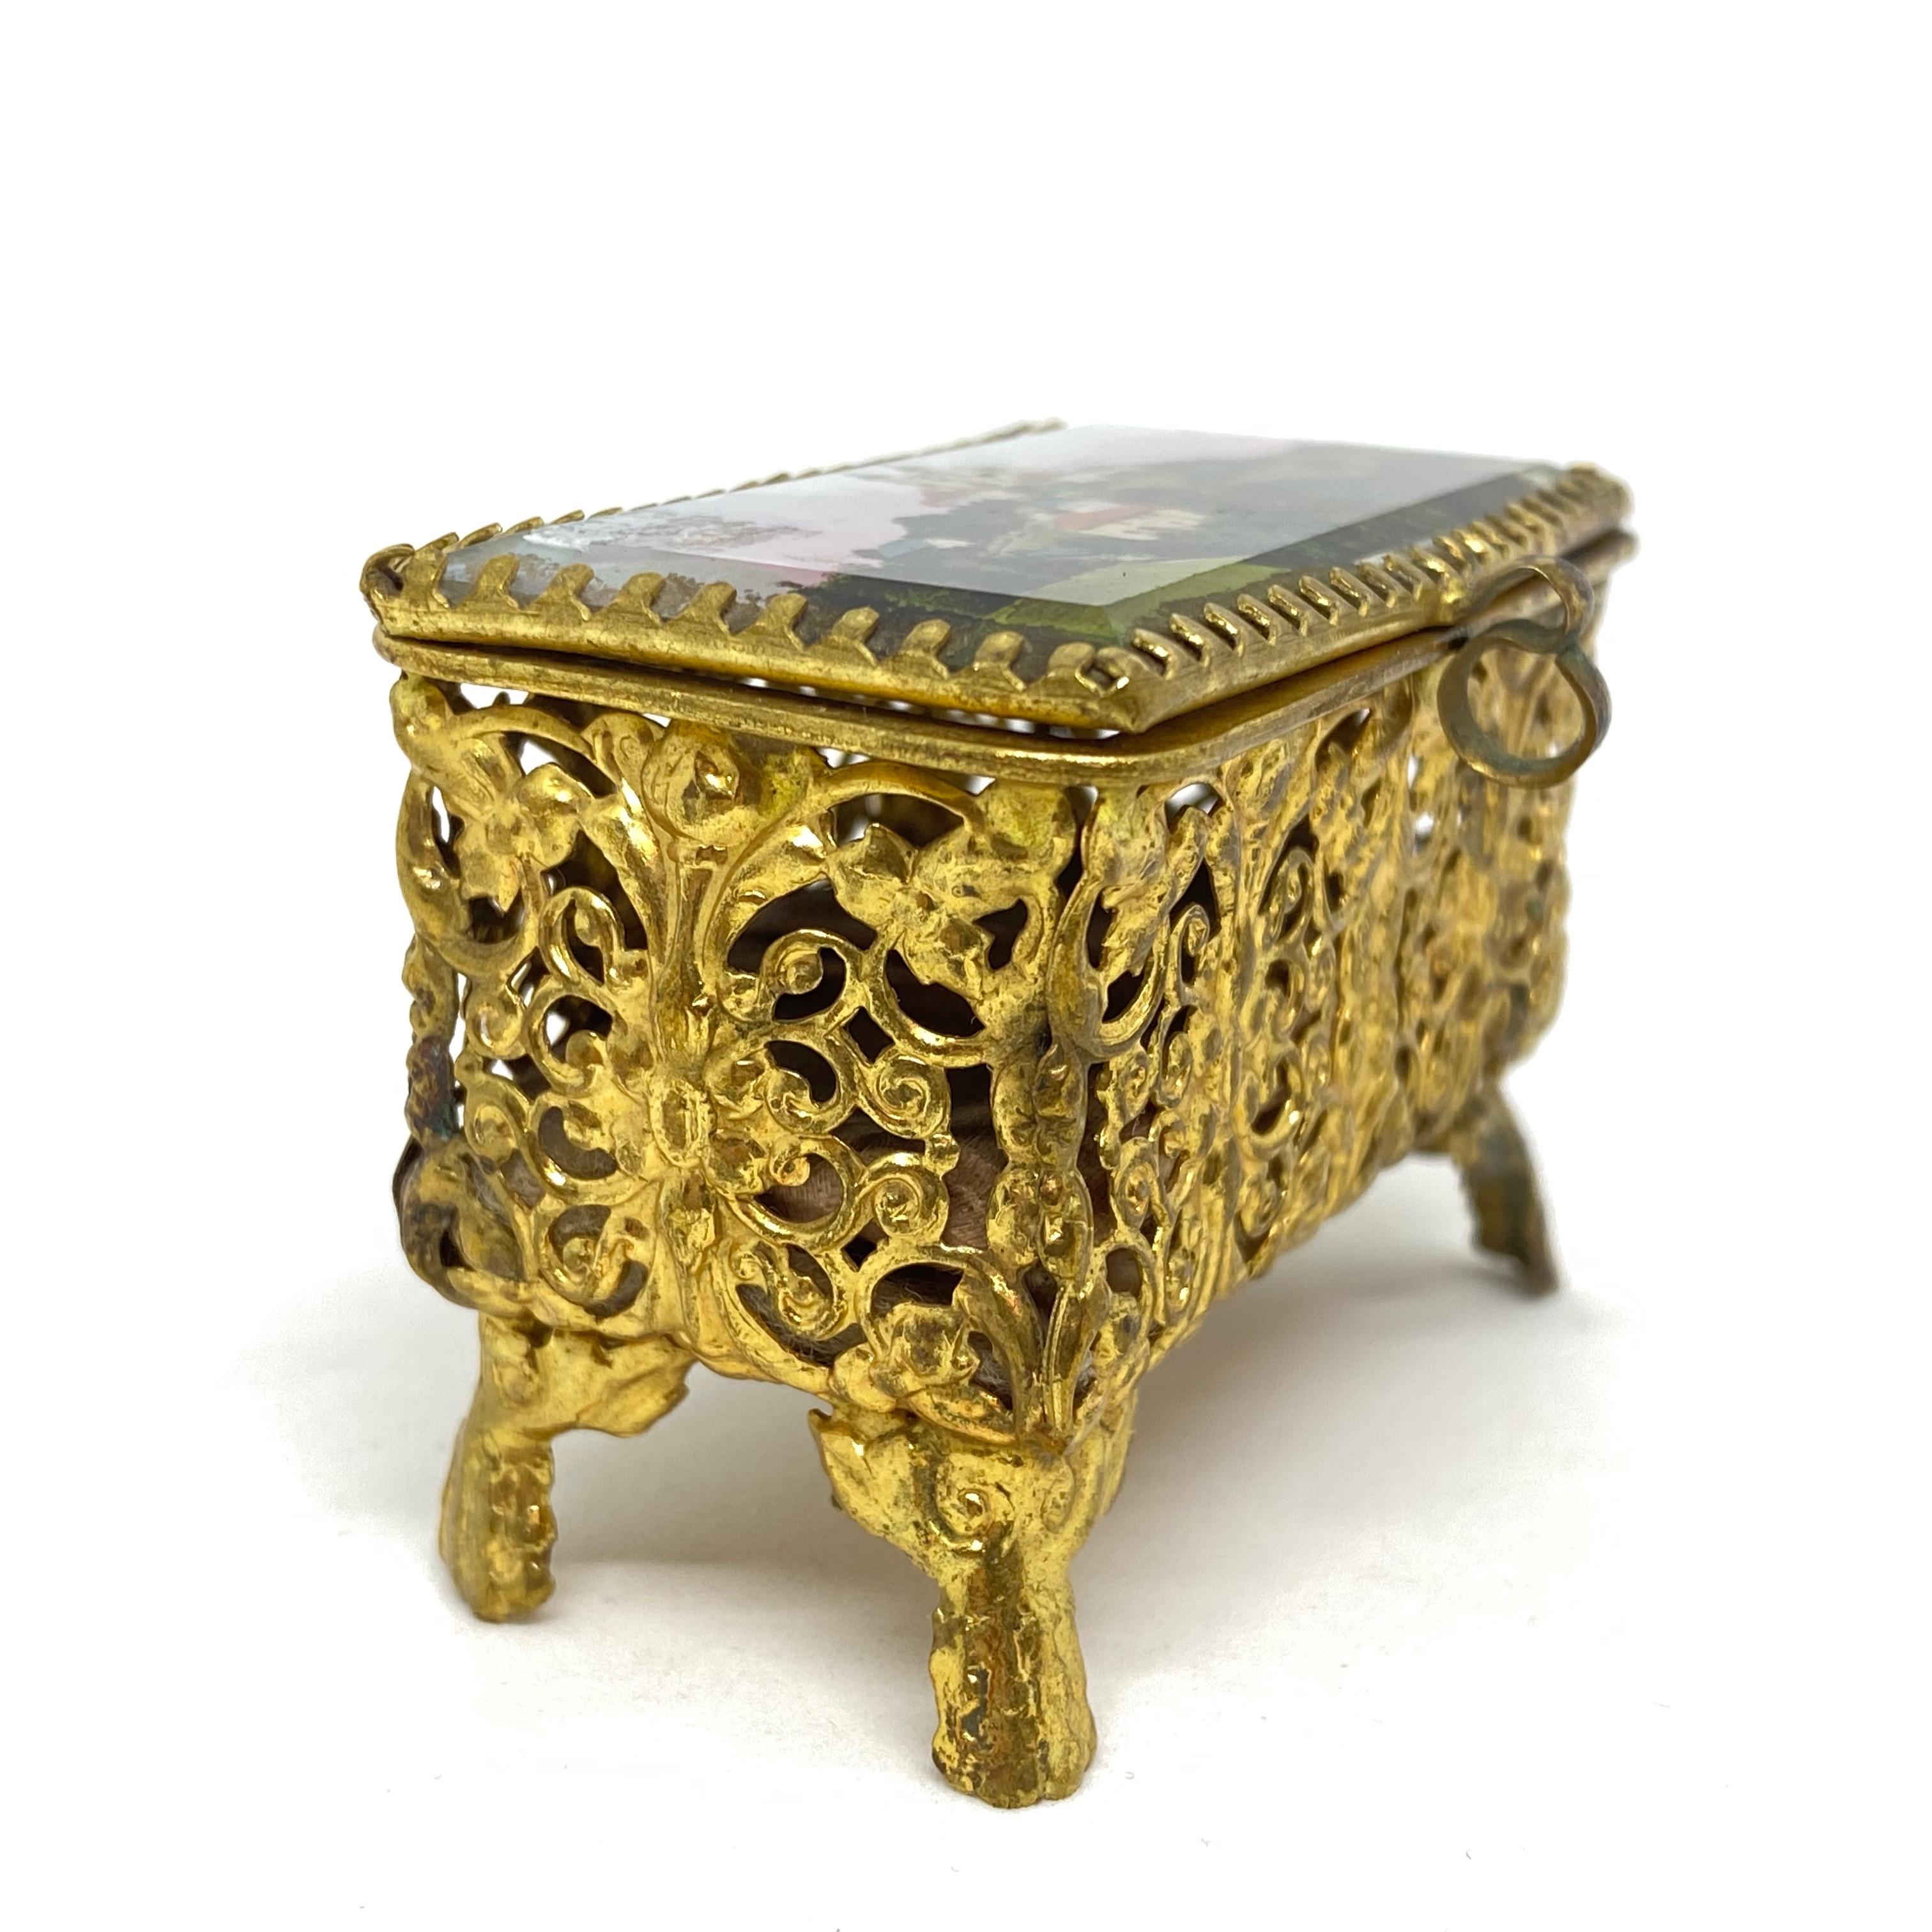 A gorgeous glass trinket box with some ormolu adornments. The hinged top featuring a City view of a Church or Castle. No restoration has been carried out on this charming little trinket box, which remains in very stabile and functioning condition,